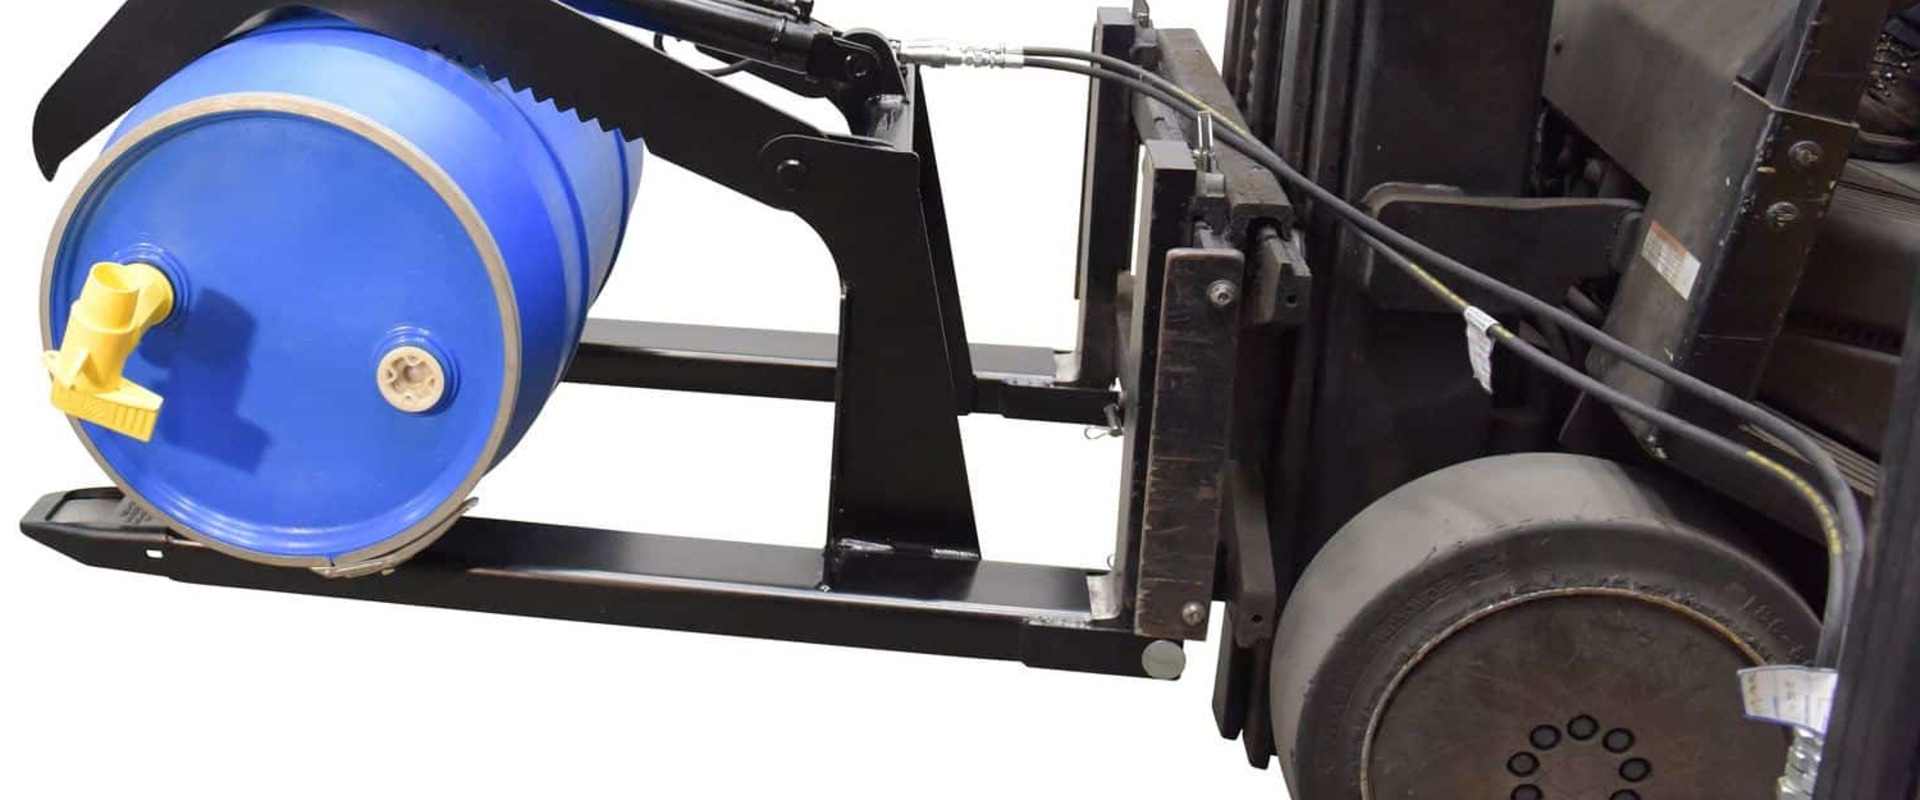 A Comprehensive Guide to Forklifts and Pallet Jacks